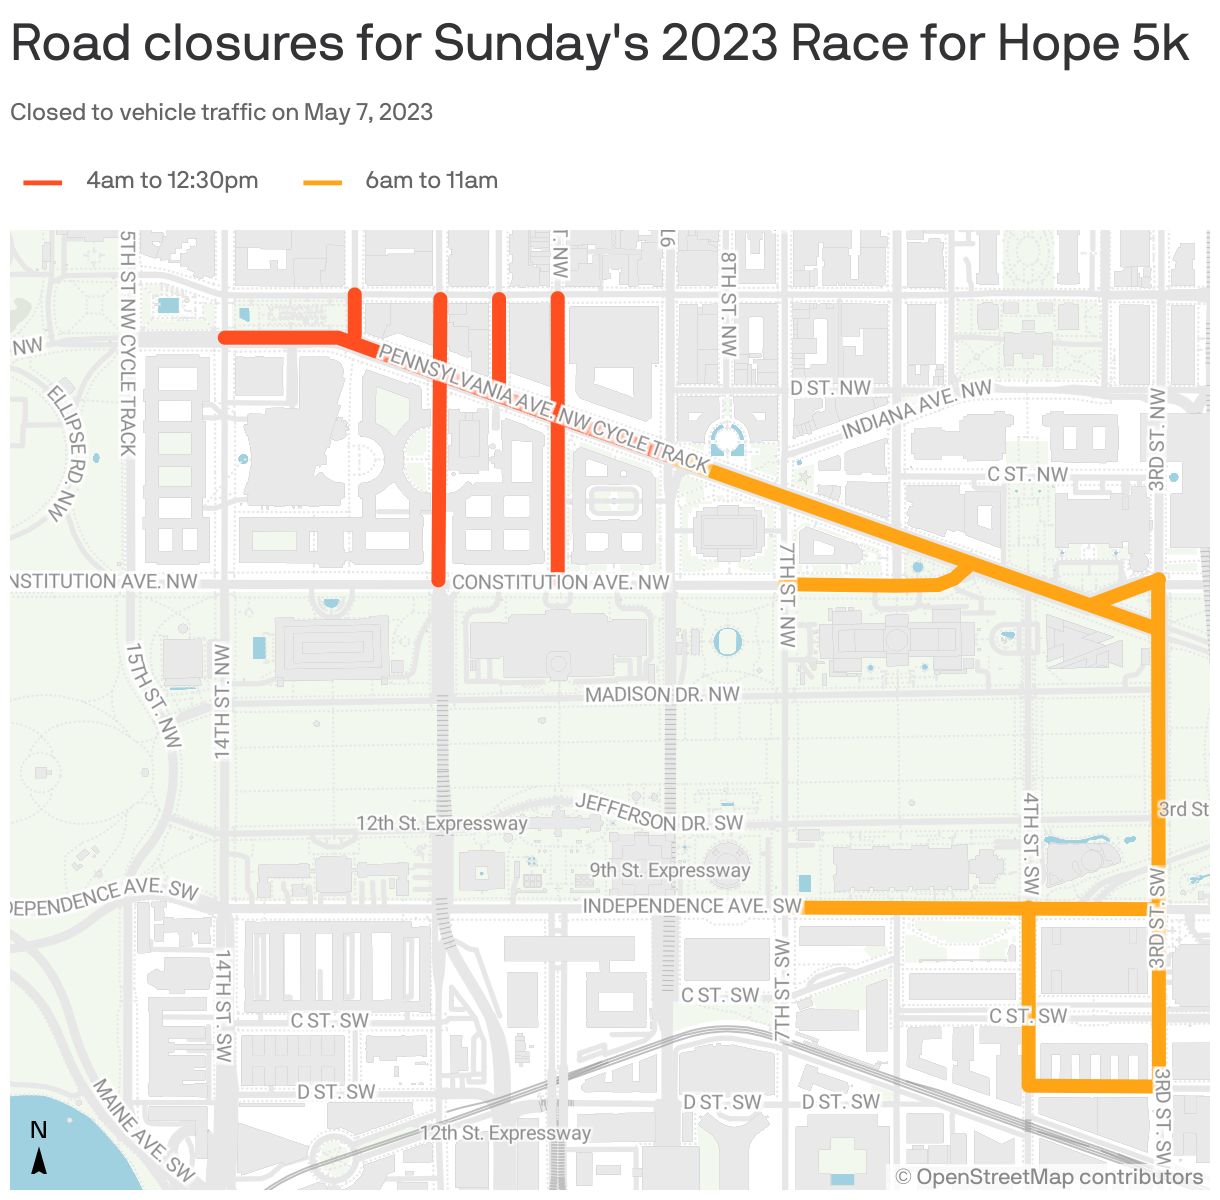 Road closures for Sunday's 2023 Race for Hope 5k